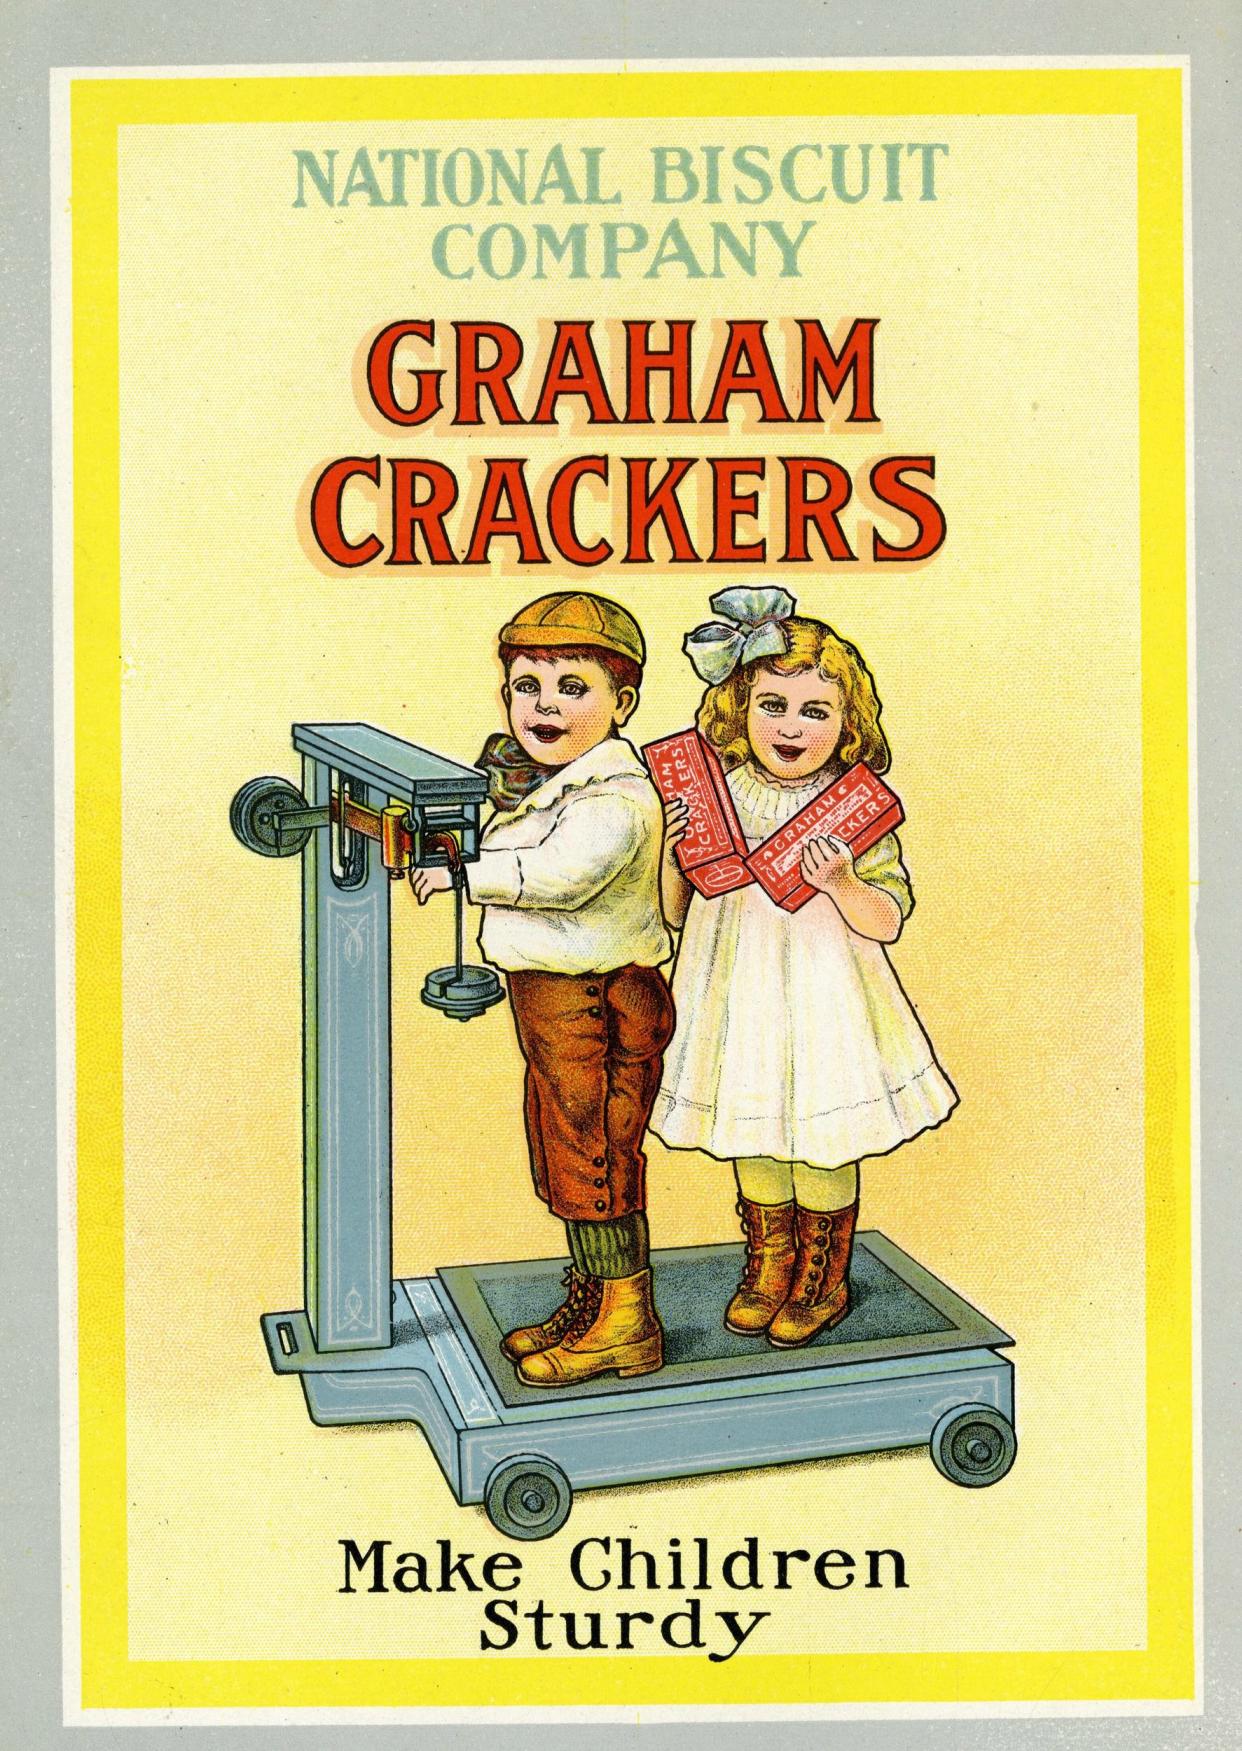 National Biscuit Company graham crackers advertisement, an illustration of two children with boxes of the company's graham crackers, on a light yellow background, 1912